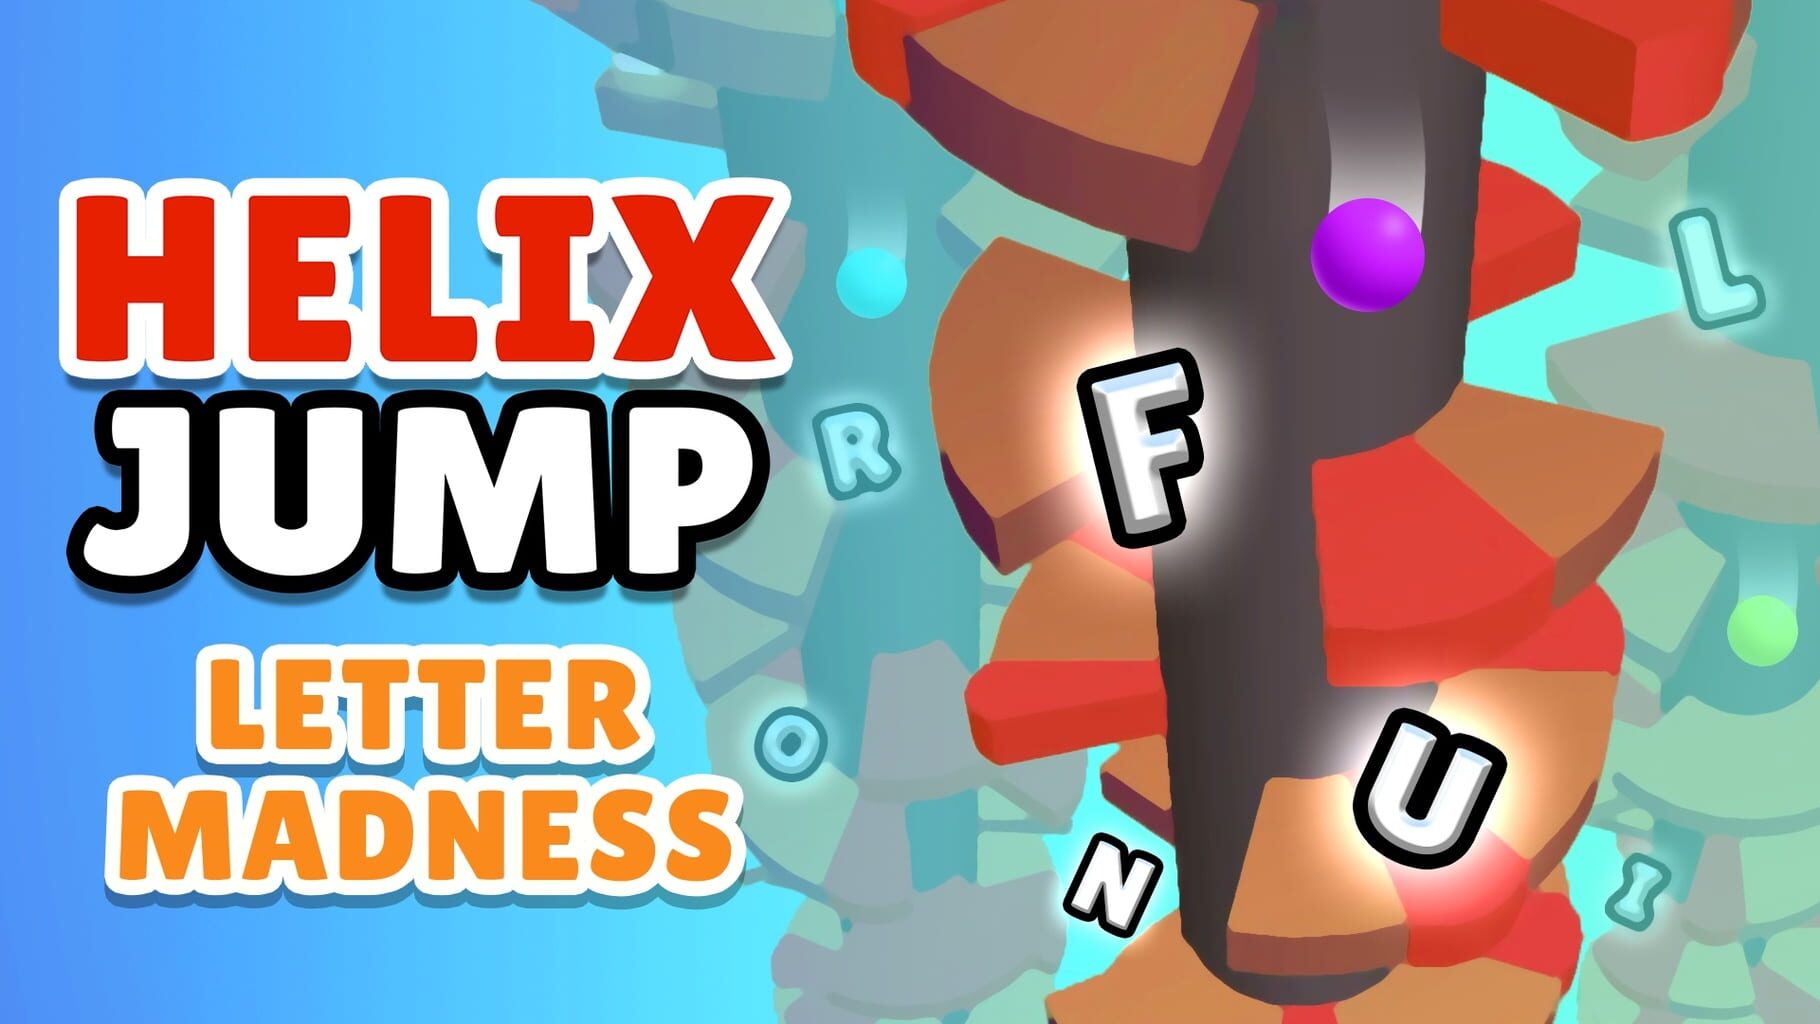 Helix Jump: Letter Madness Image